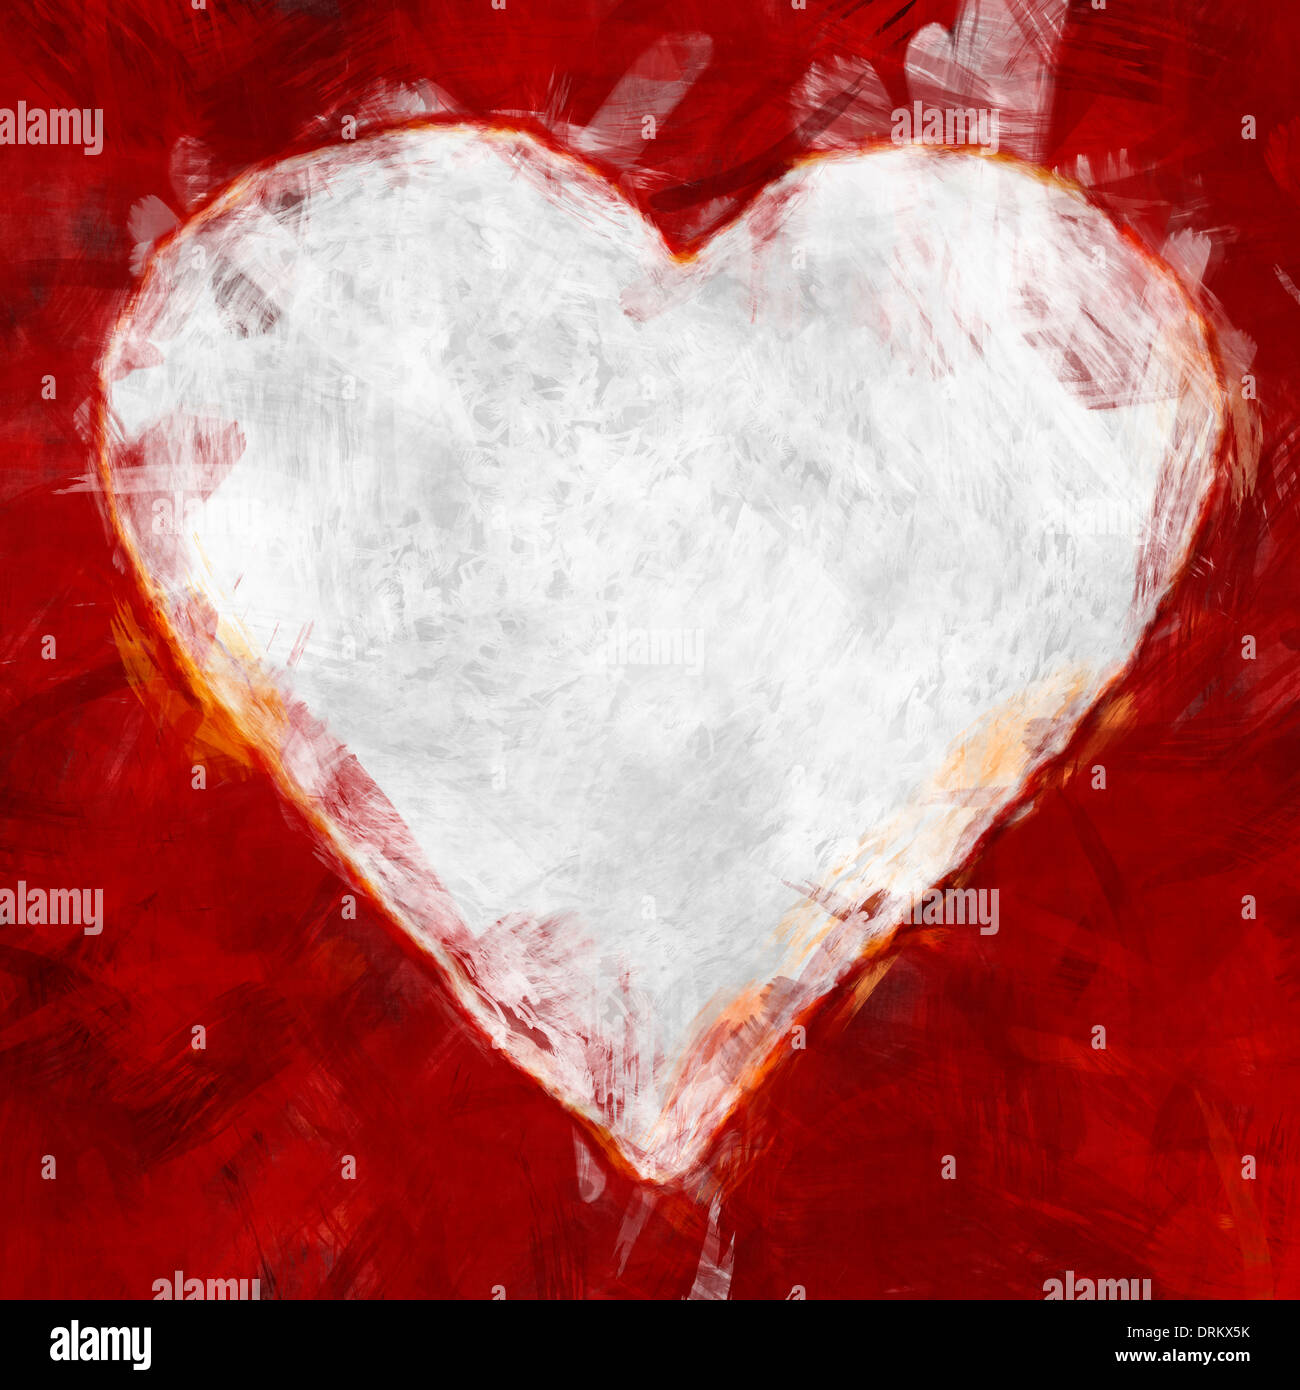 Textured digital painting of a heart shape in red and white with space for copy. Stock Photo